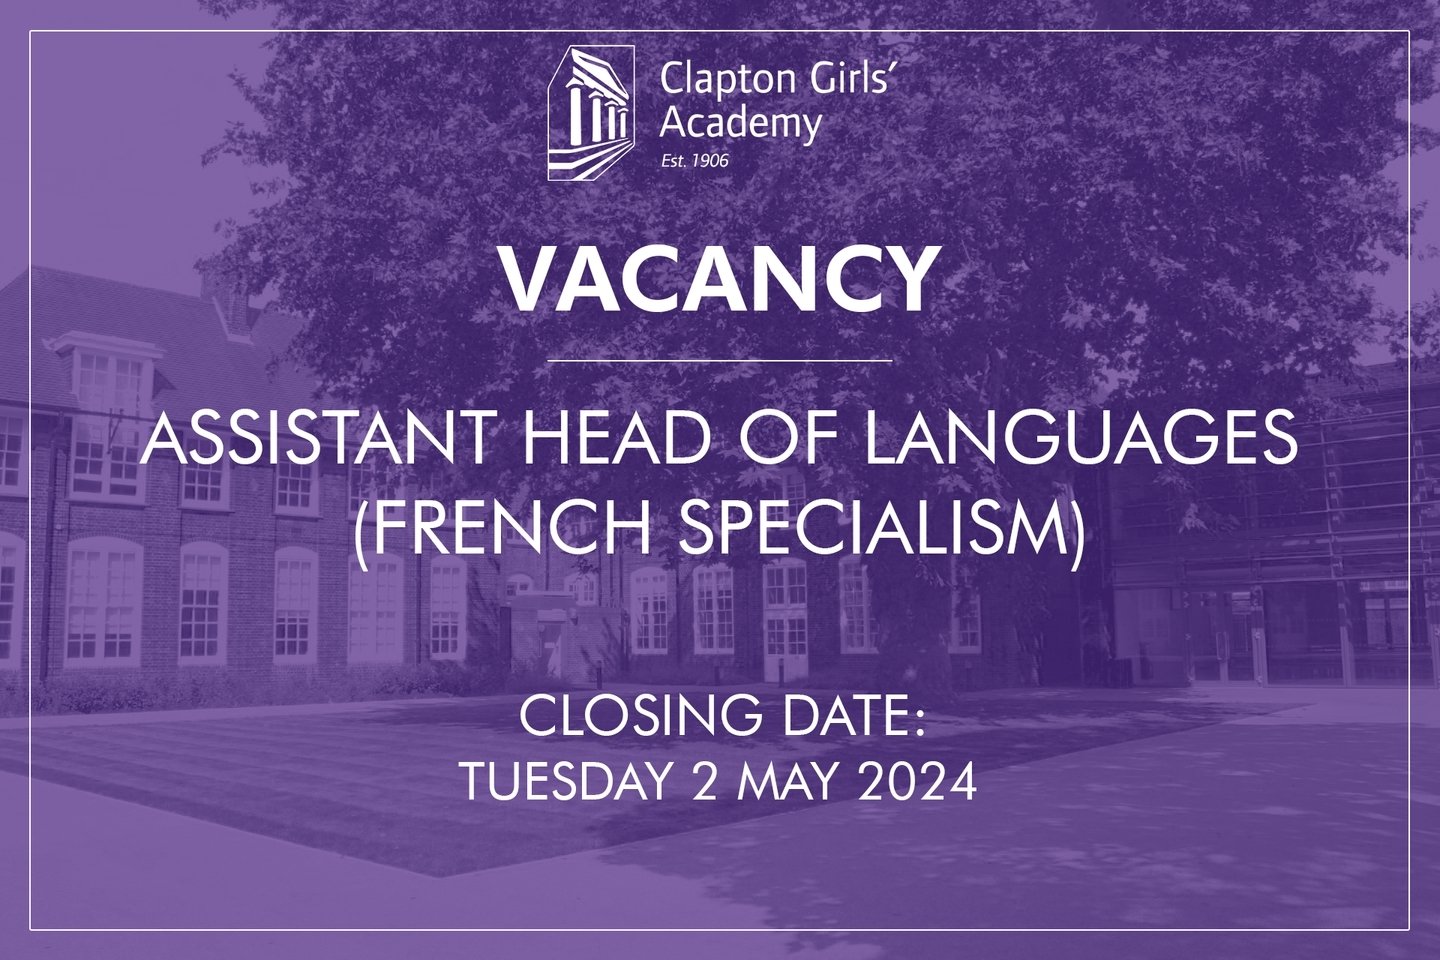 An Assistant Head of Languages role has just opened up at our Academy‼️

If you have a love of languages, have the ability to teach French to KS5 and Spanish to KS3 and have proven leadership skills and qualities, then please click the link in our bi